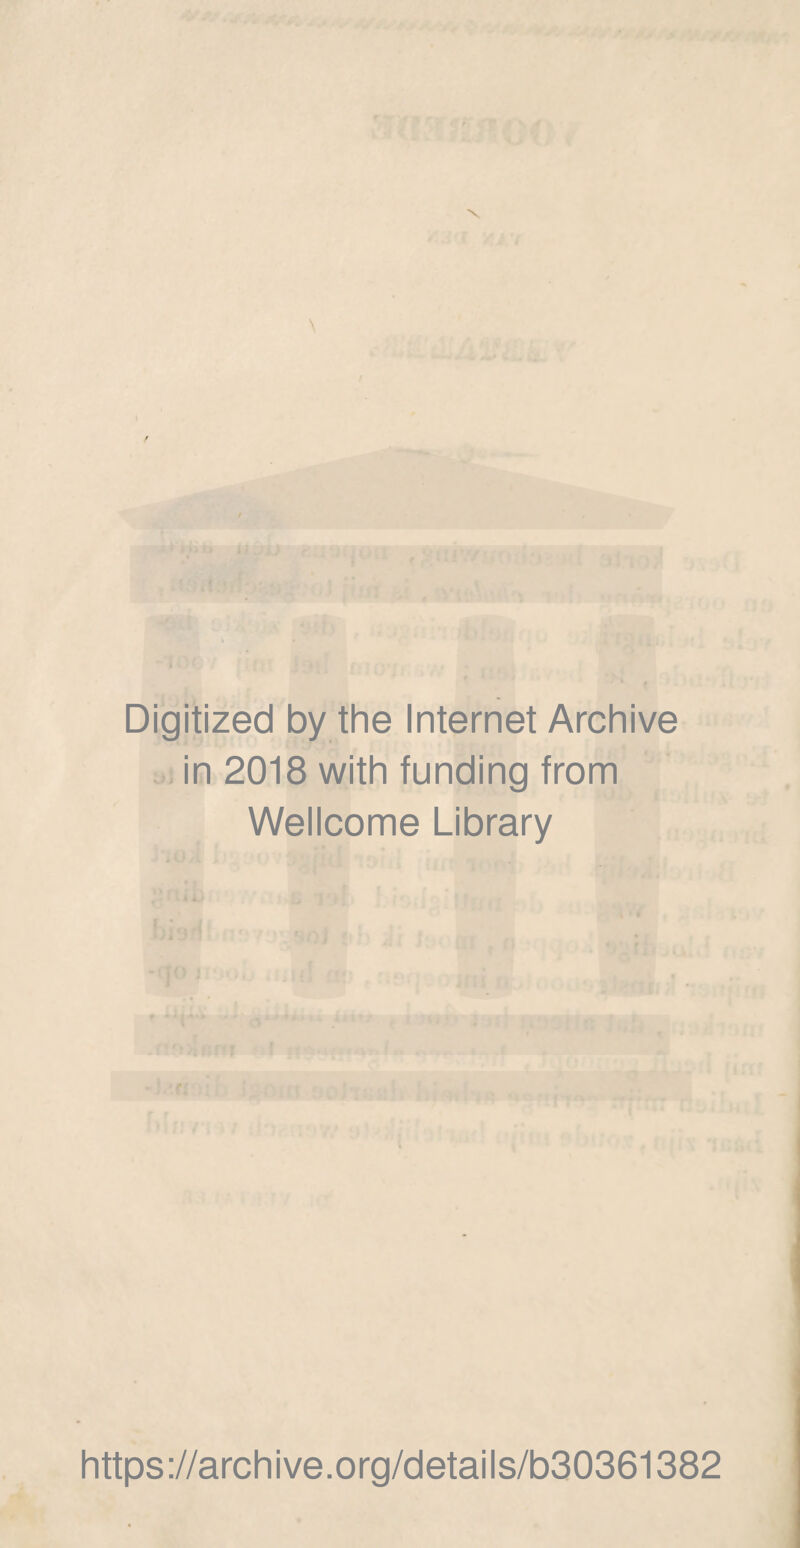 X \ Digitized by the Internet Archive in 2018 with funding from Wellcome Library https://archive.org/details/b30361382